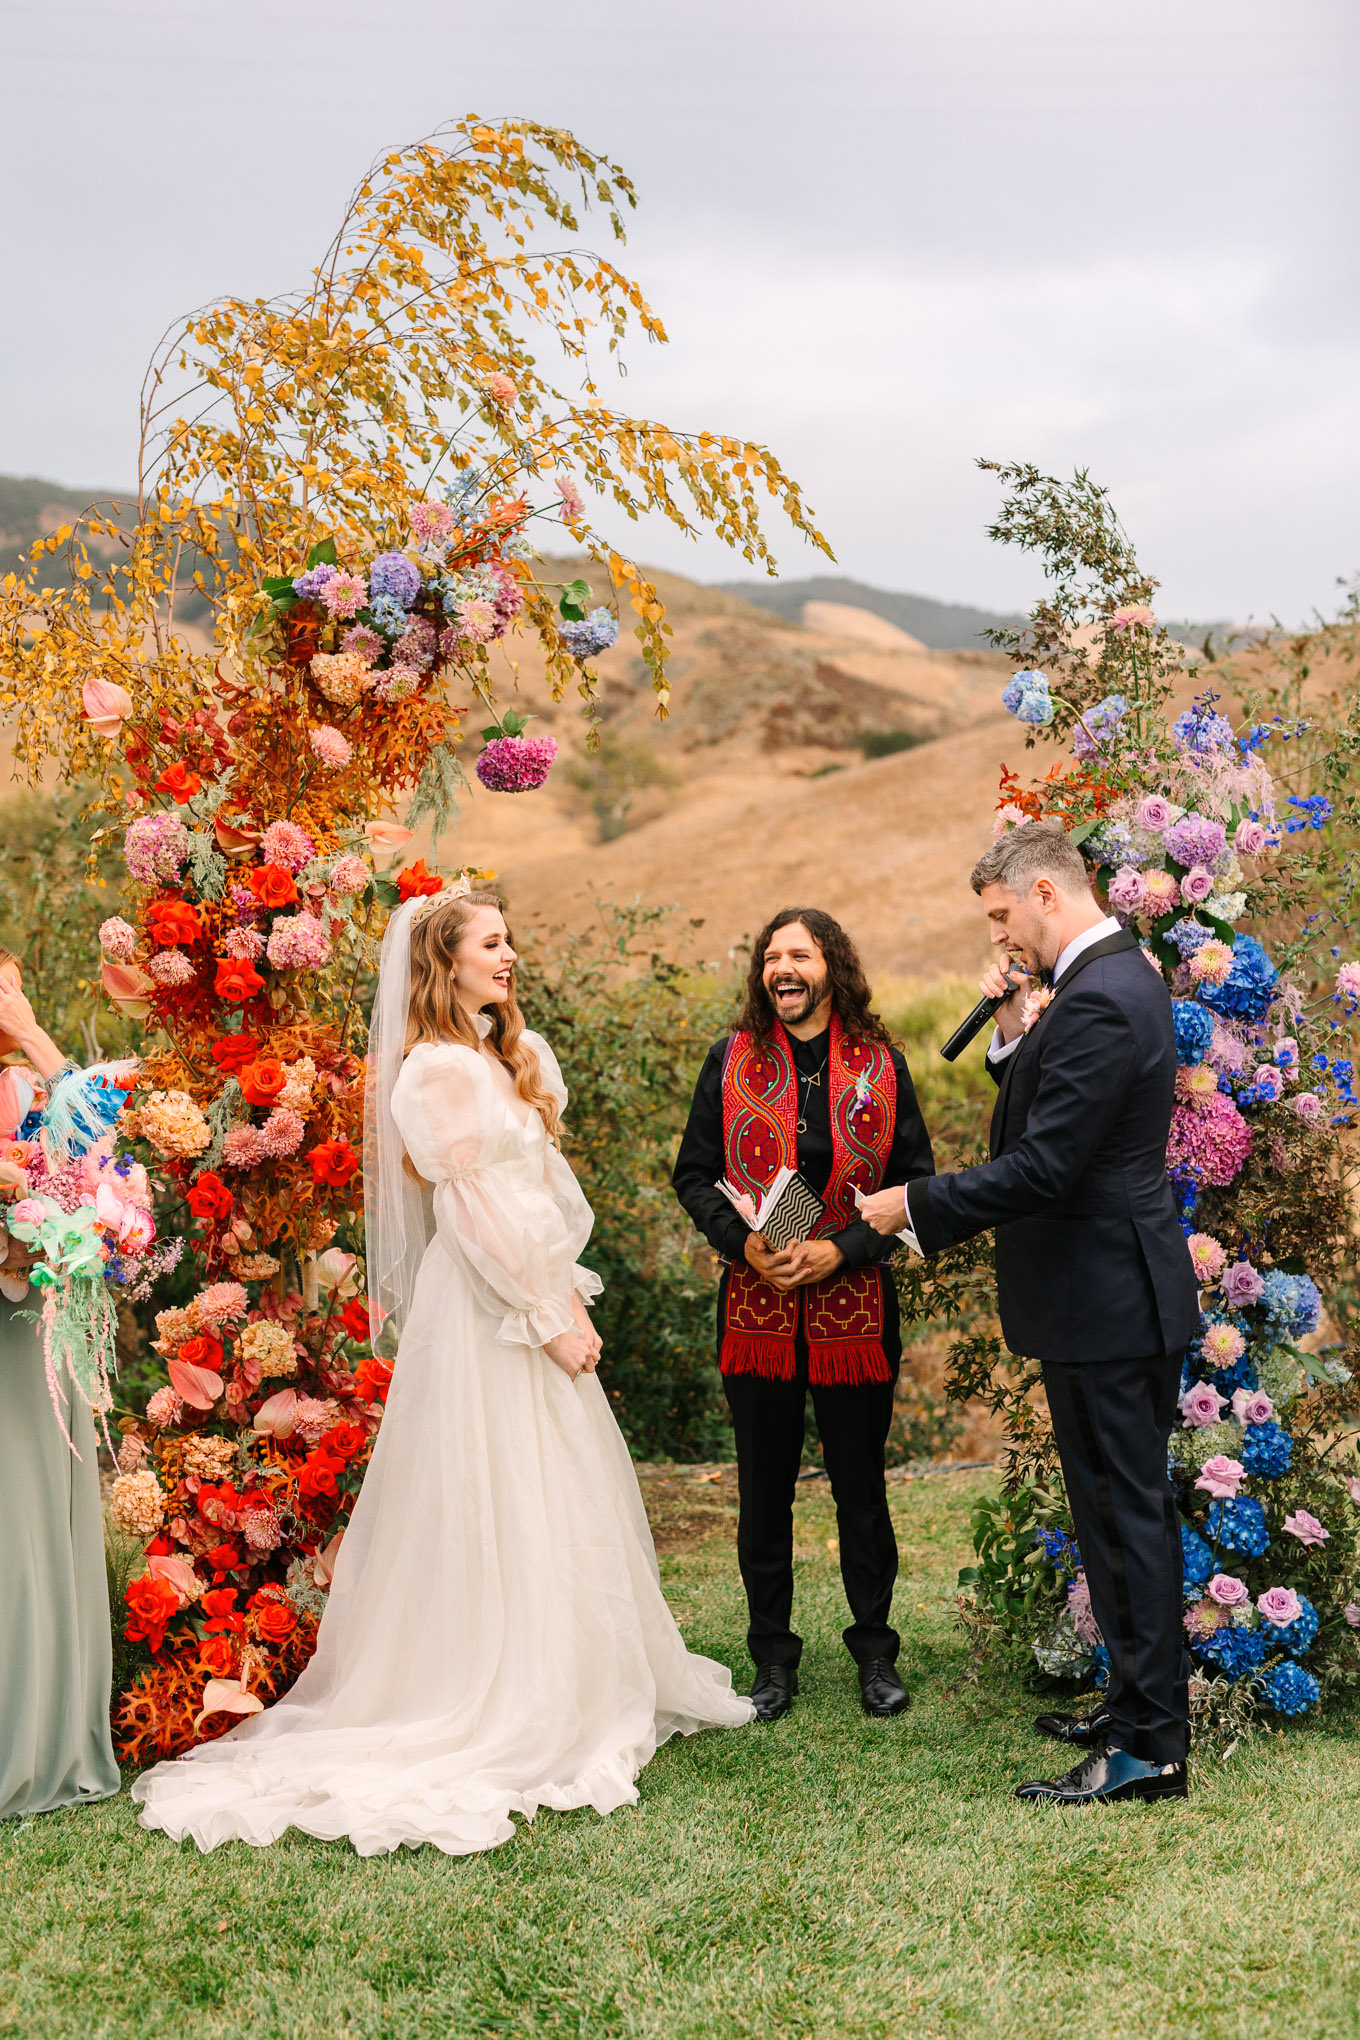 Allison Harvard & Jeremy Burke's floral-filled wedding ceremony | Colorful and quirky wedding at Higuera Ranch in San Luis Obispo | #sanluisobispowedding #californiawedding #higueraranch #madonnainn   Source: Mary Costa Photography | Los Angeles